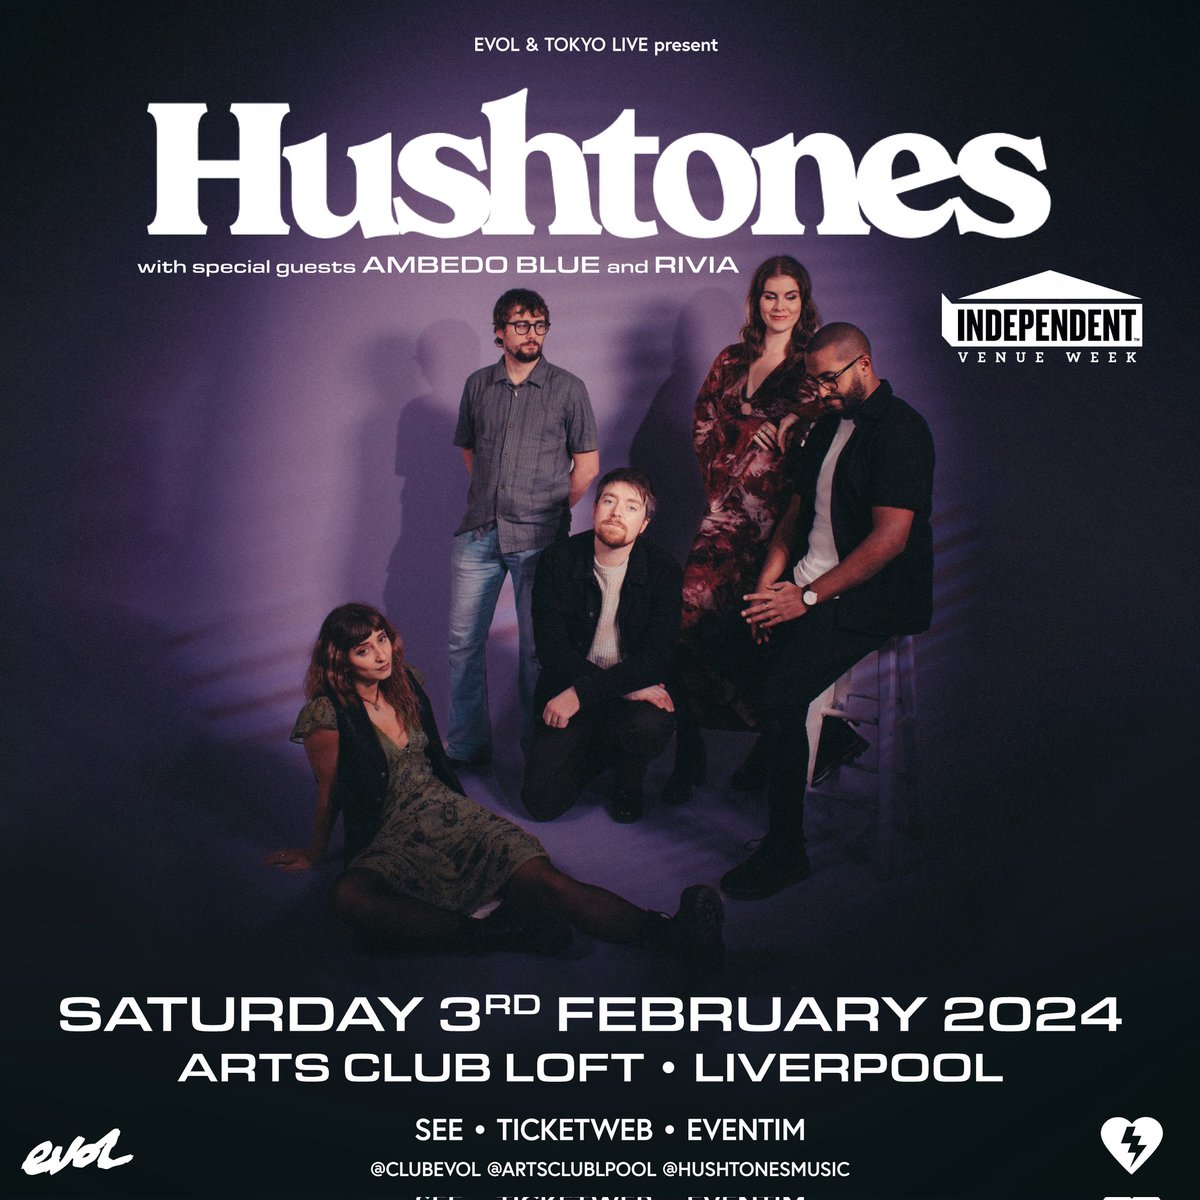 𝐒𝐔𝐏𝐏𝐎𝐑𝐓 𝐀𝐍𝐍𝐎𝐔𝐍𝐂𝐄𝐌𝐄𝐍𝐓 Delighted to add @Ambedo_Blue and @RIVIA_BAND as special guests to @Hushtonesmusic at their @artsclublpool show as part of @IVW_UK this coming Saturday February 3rd. #IVW24 Tickets available via @seetickets here: seetickets.com/event/hushtone…